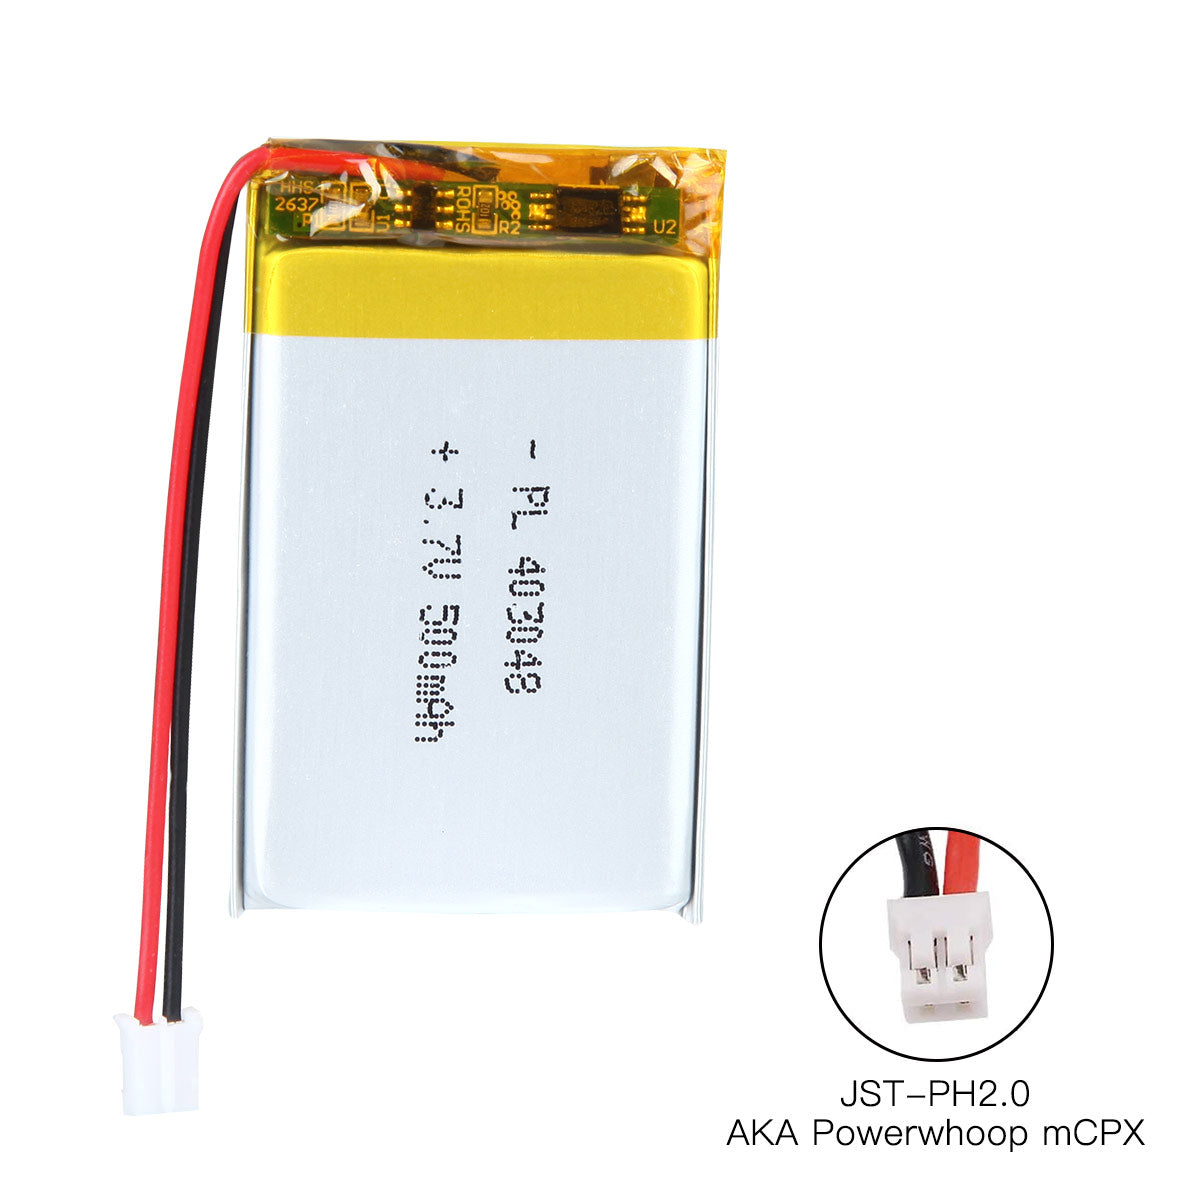 YDL 3.7V 500mAh 403048 Rechargeable Lithium Polymer Battery Length 50mm